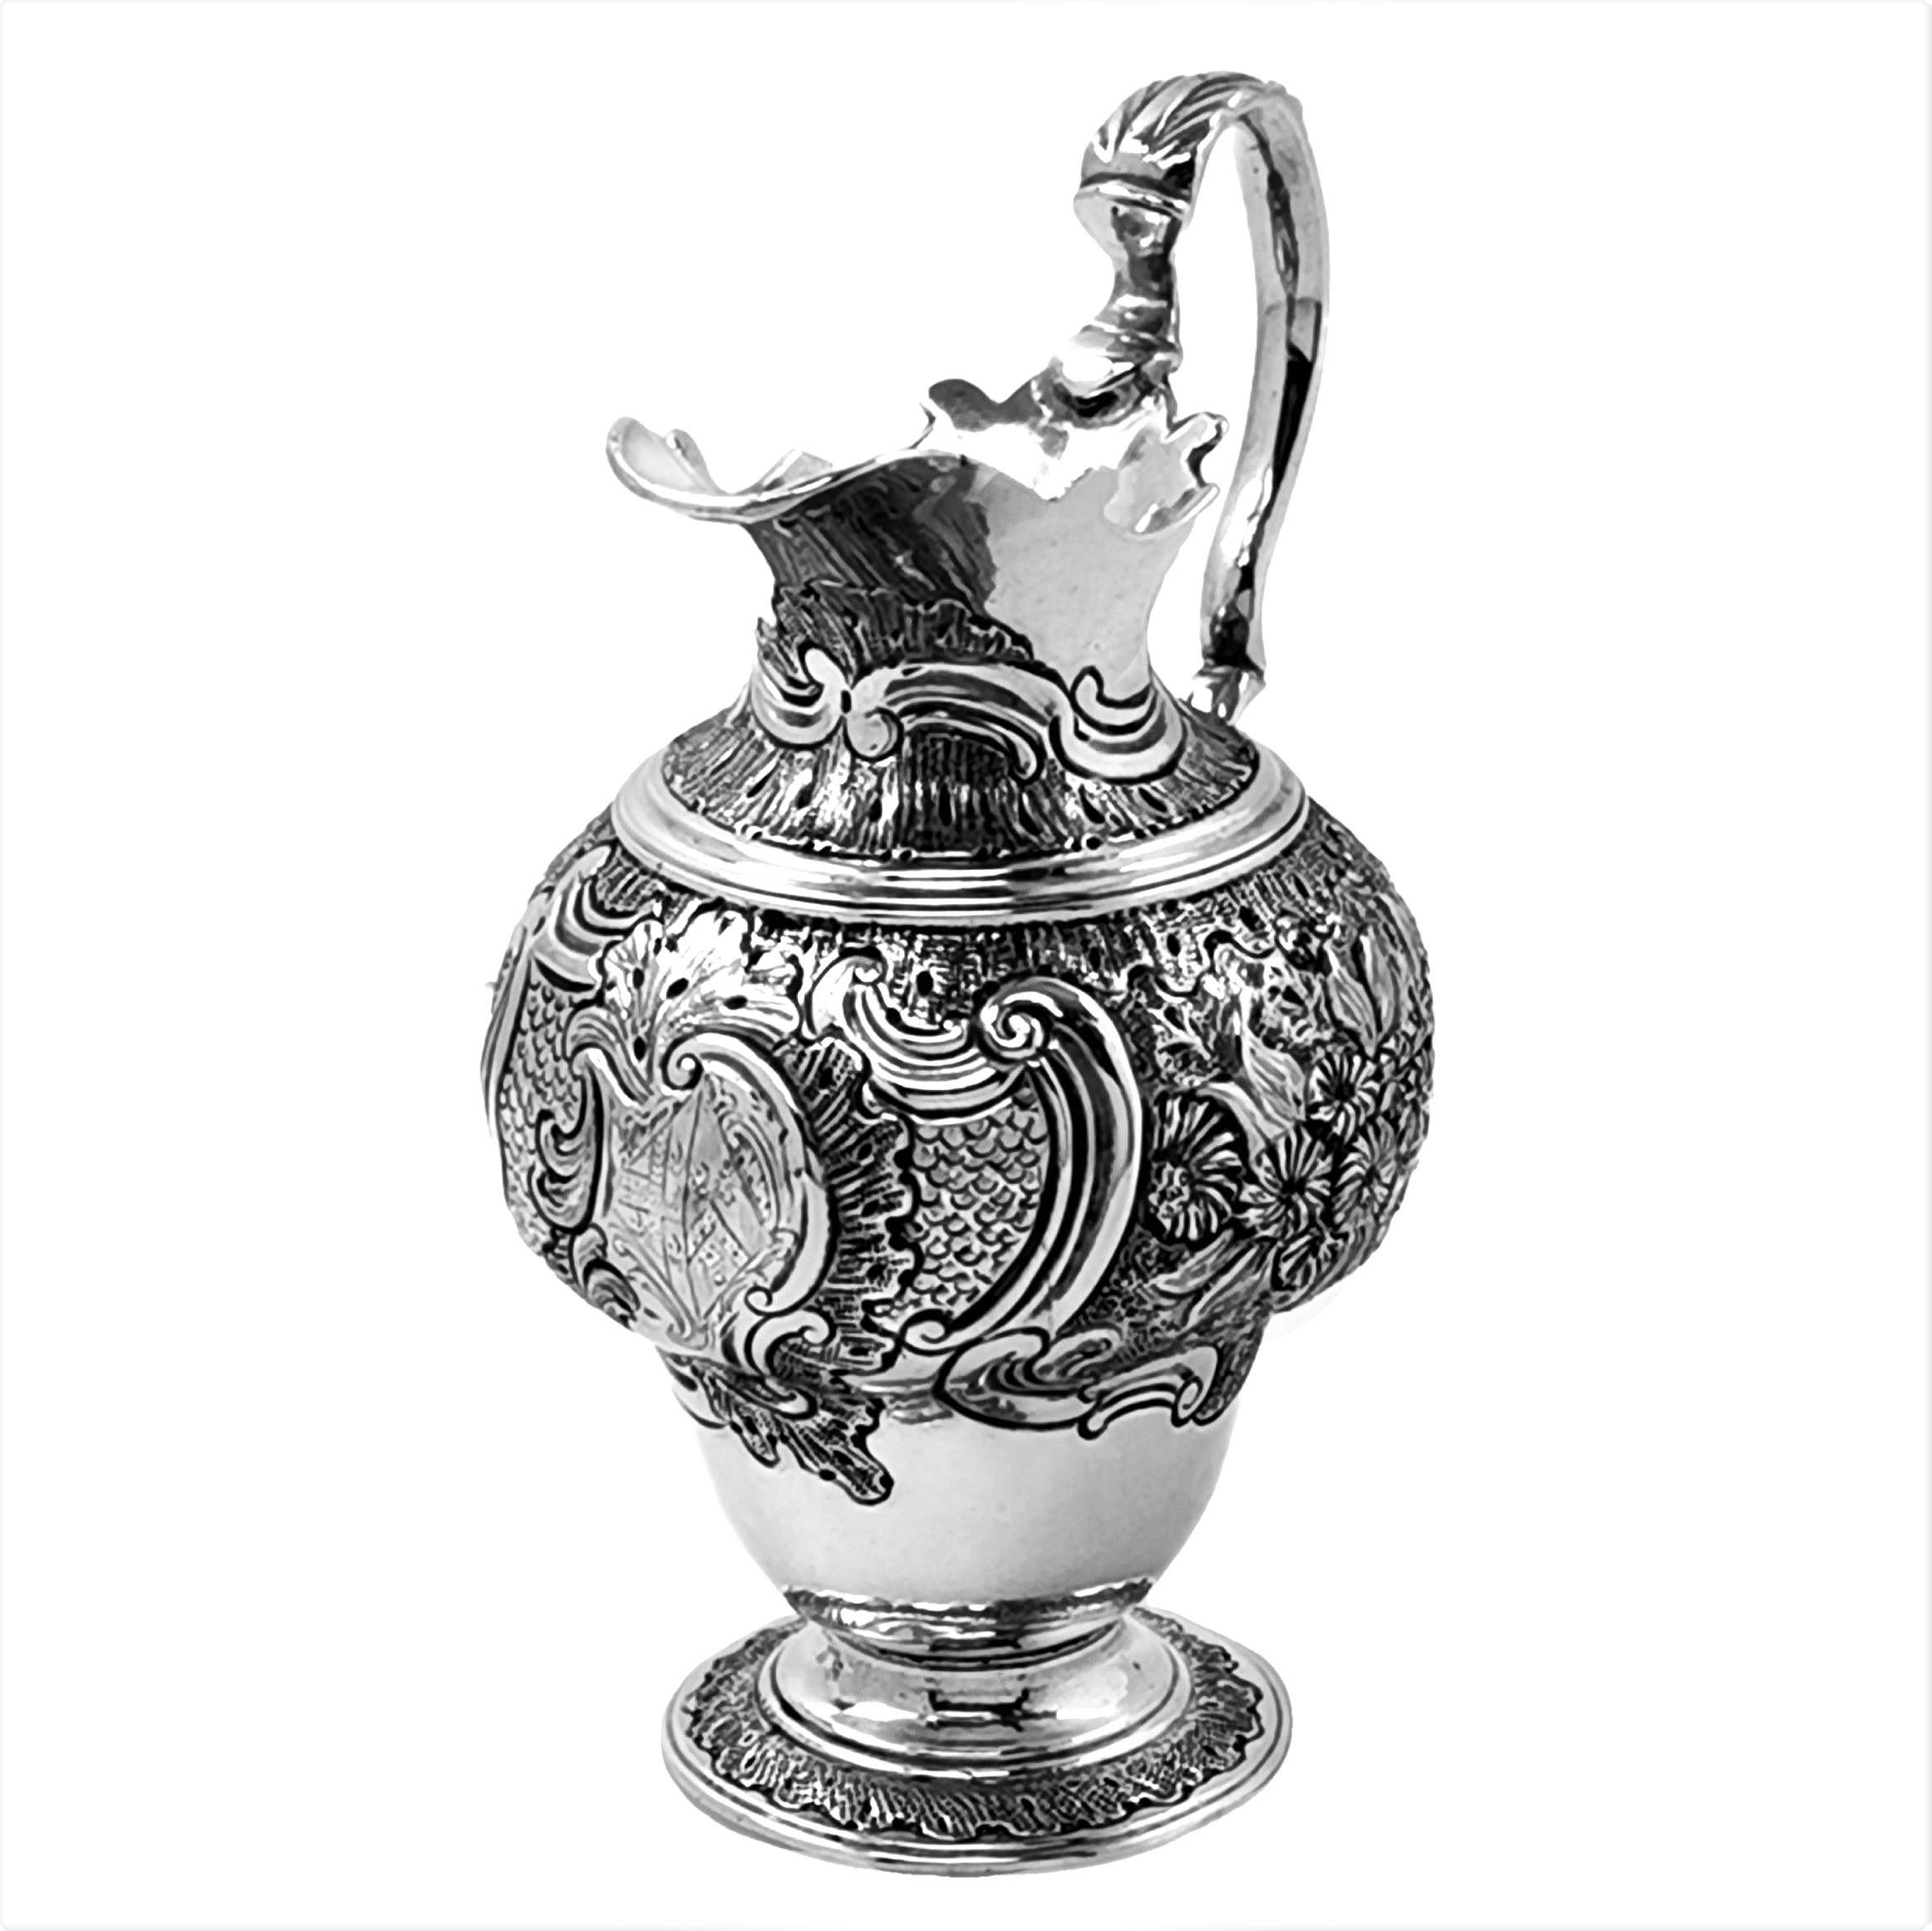 A lovely Antique George II sterling Silver Cream Jug with an ornate floral chased design. The Cream Jug has a engraved armorial in a central cartouche. The Jug stands on a chased spread foot.

Made in London, England in circa 1750 by John